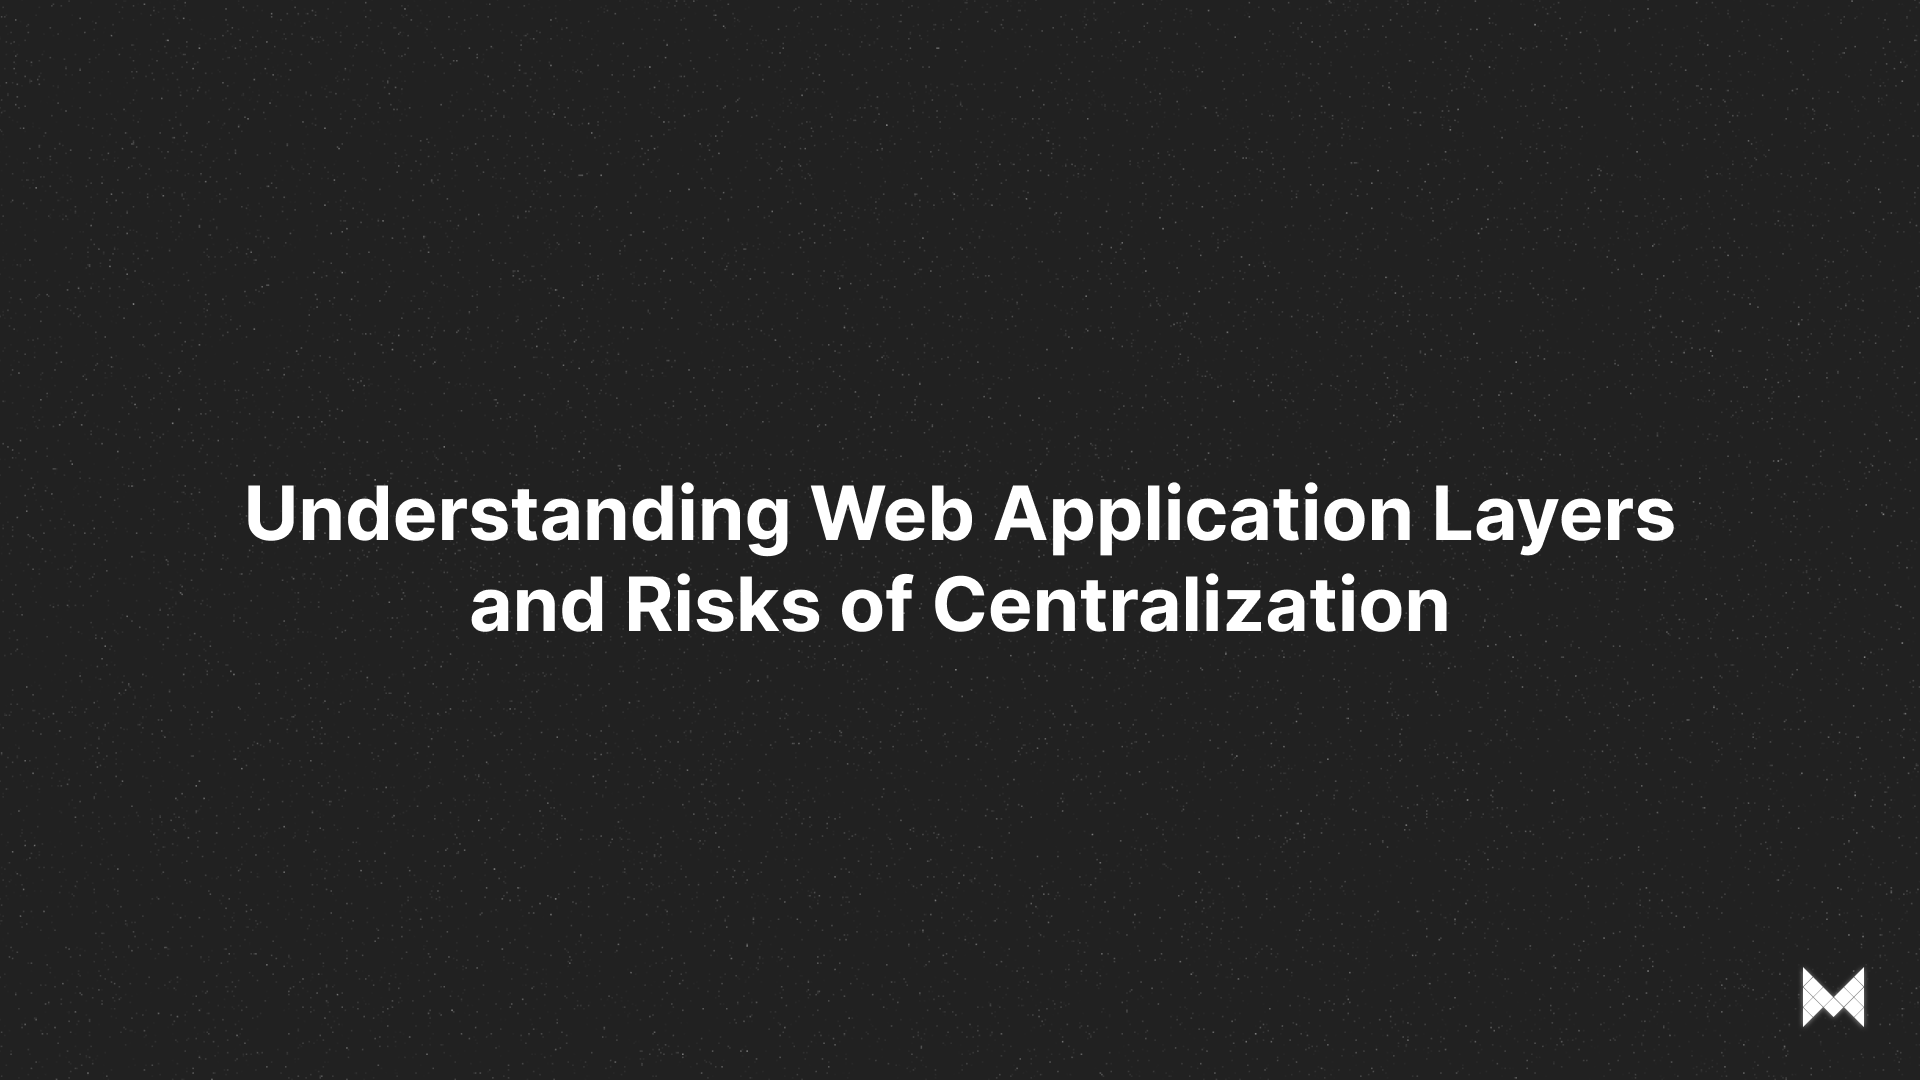 Understanding Web Application Layers and Risks of Centralization